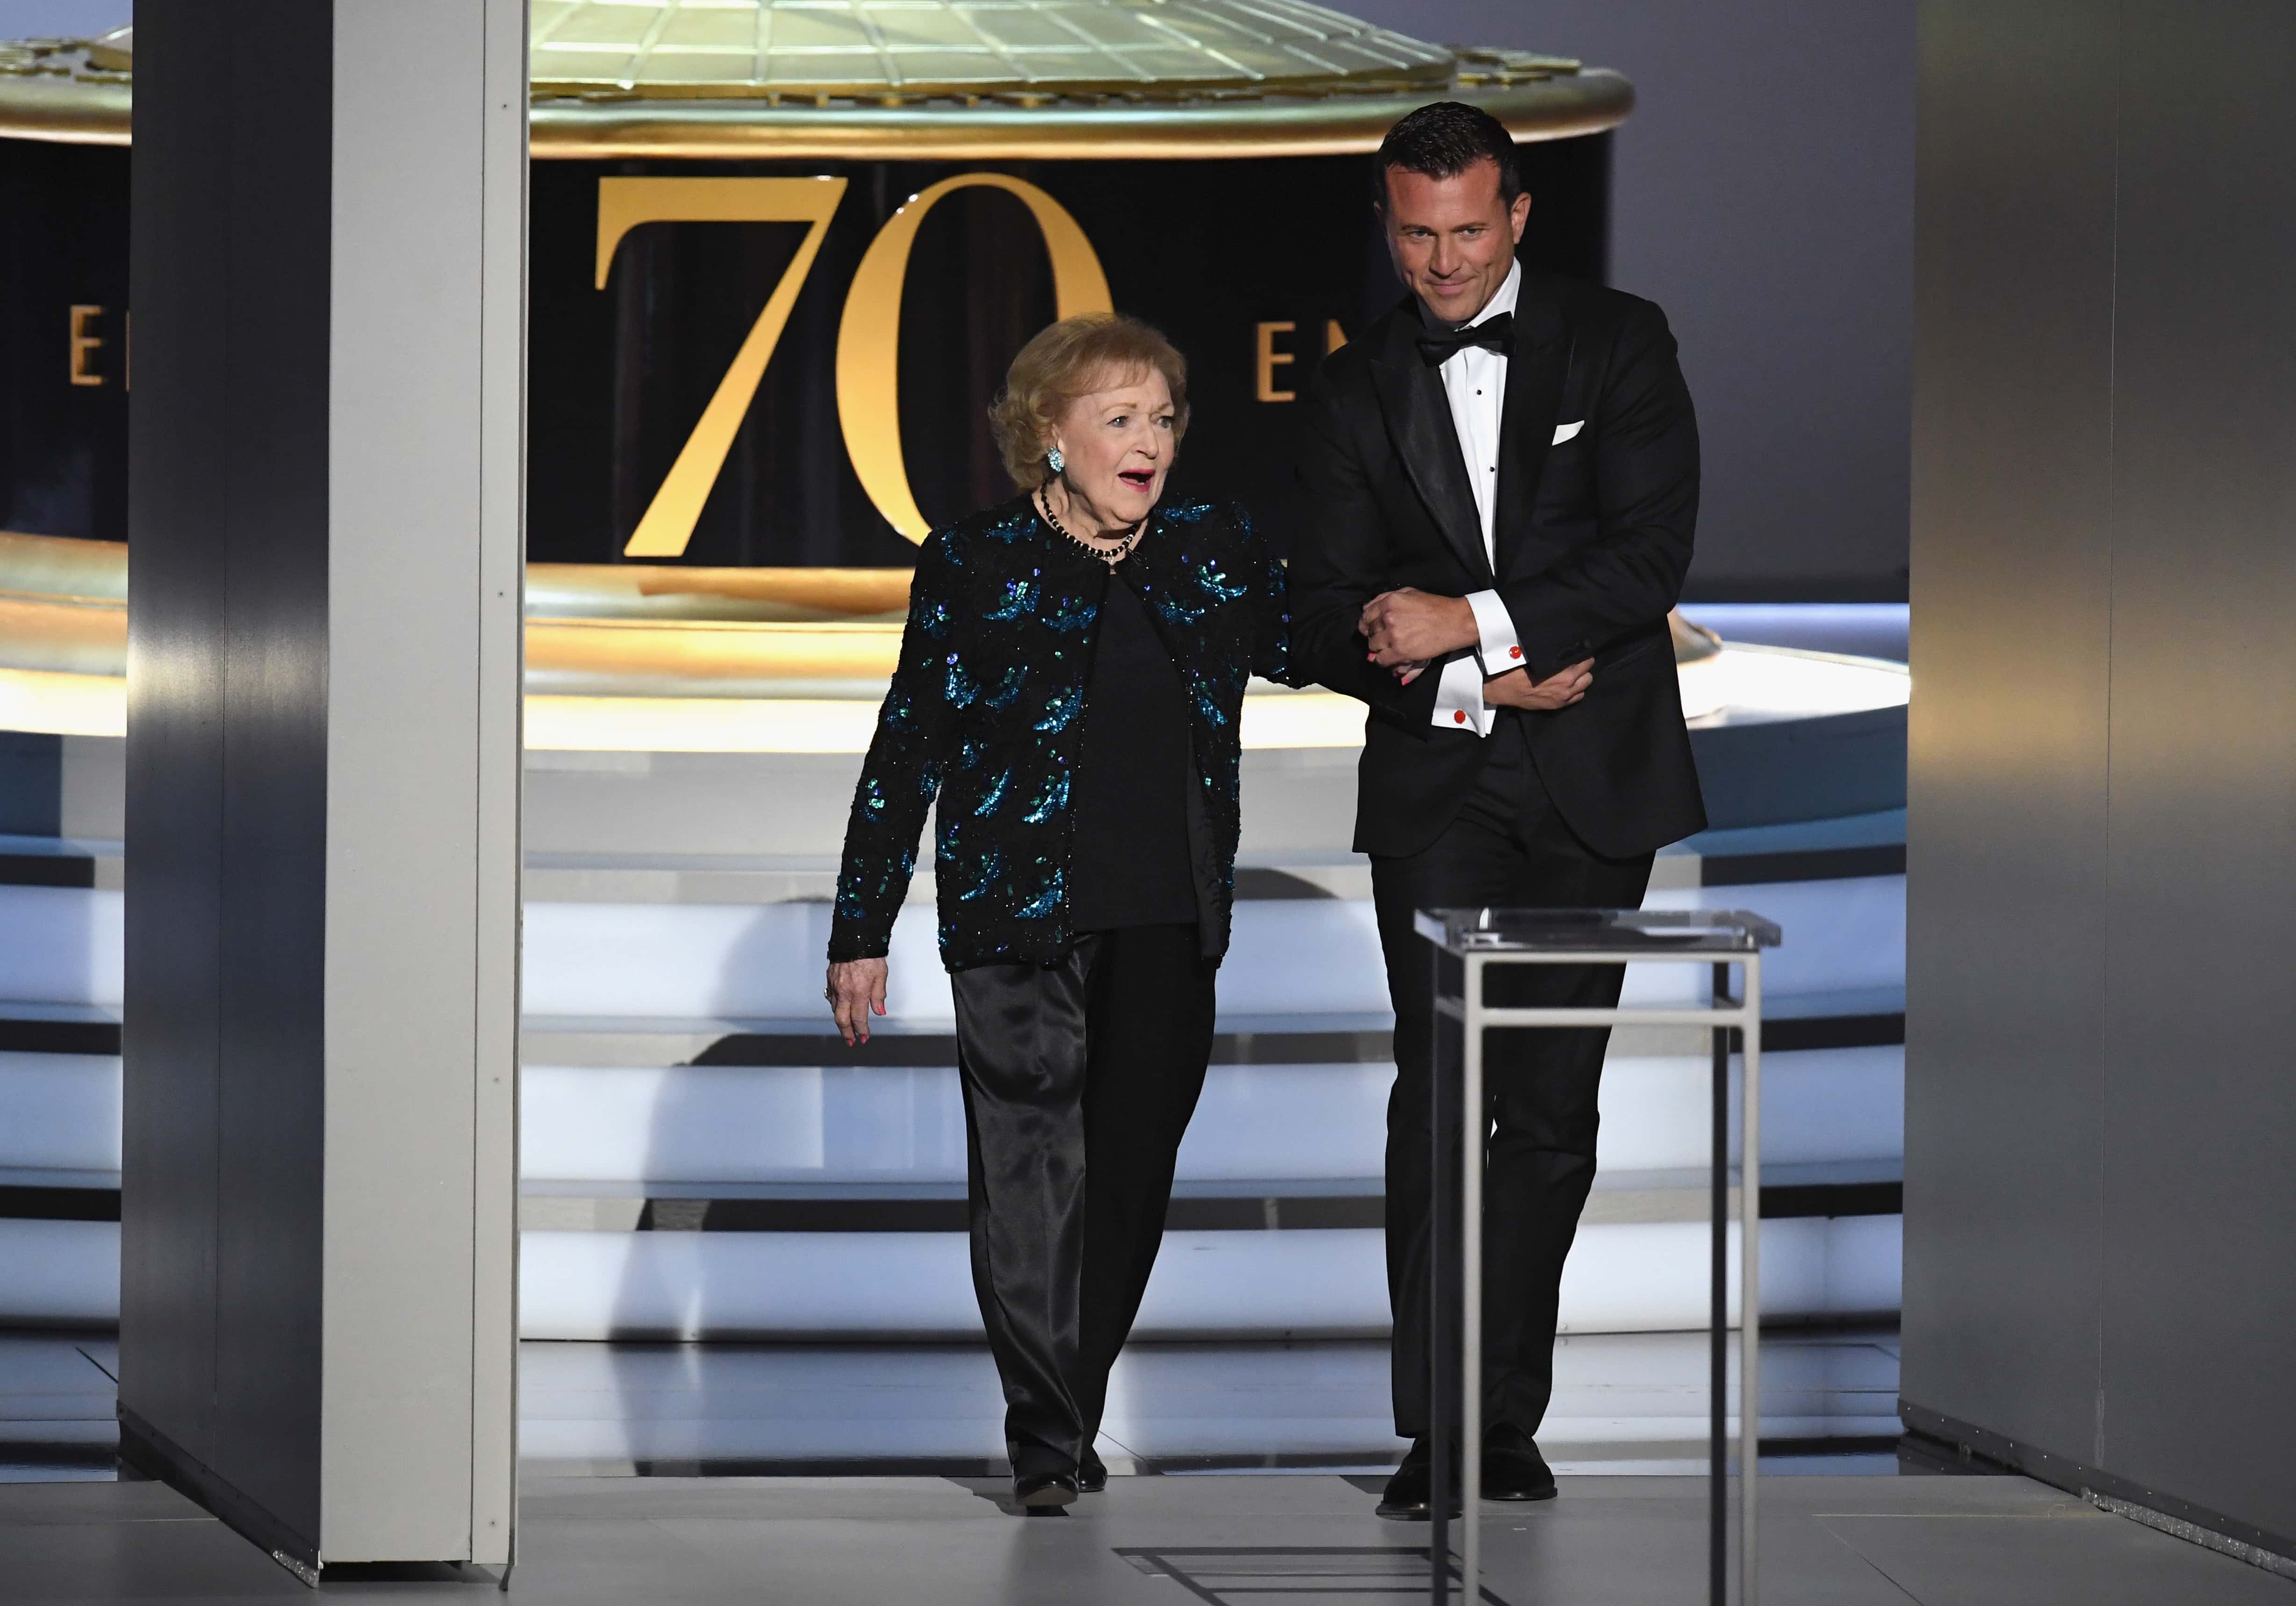 70th Emmy Awards - Show. Betty White on stage.